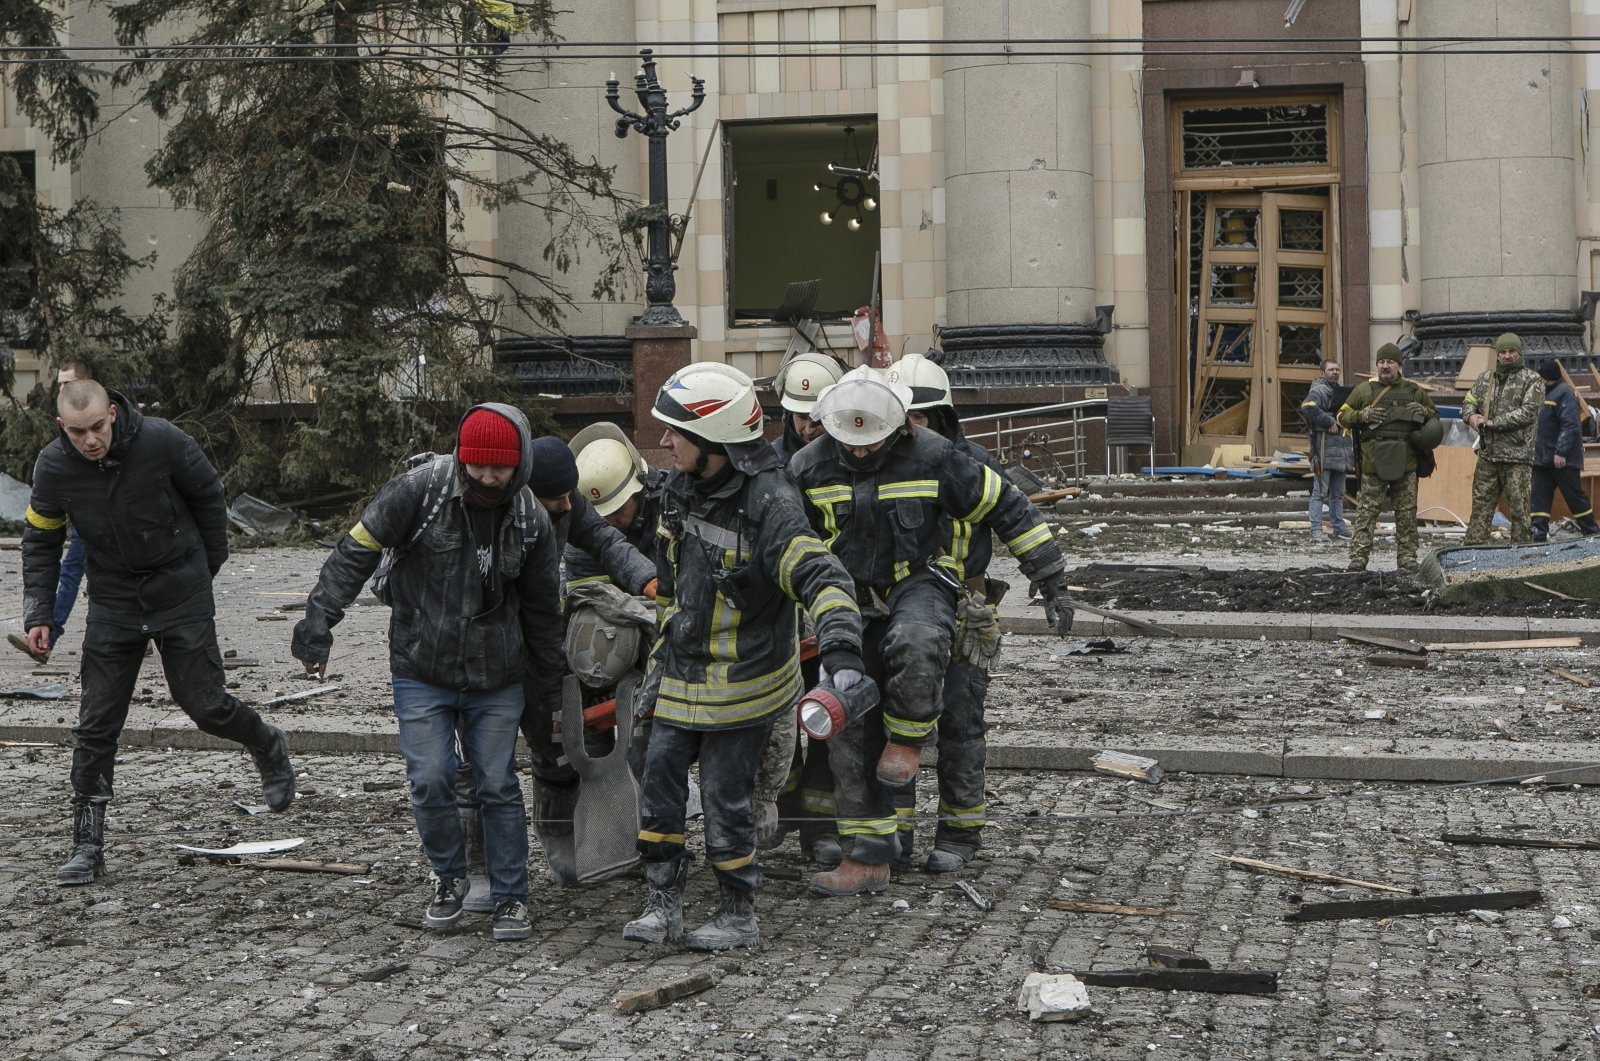 Ukrainian emergency service personnel carry the body of a victim out of the damaged City Hall building following shelling in Kharkiv, Ukraine, March 1, 2022. (AP Photo)